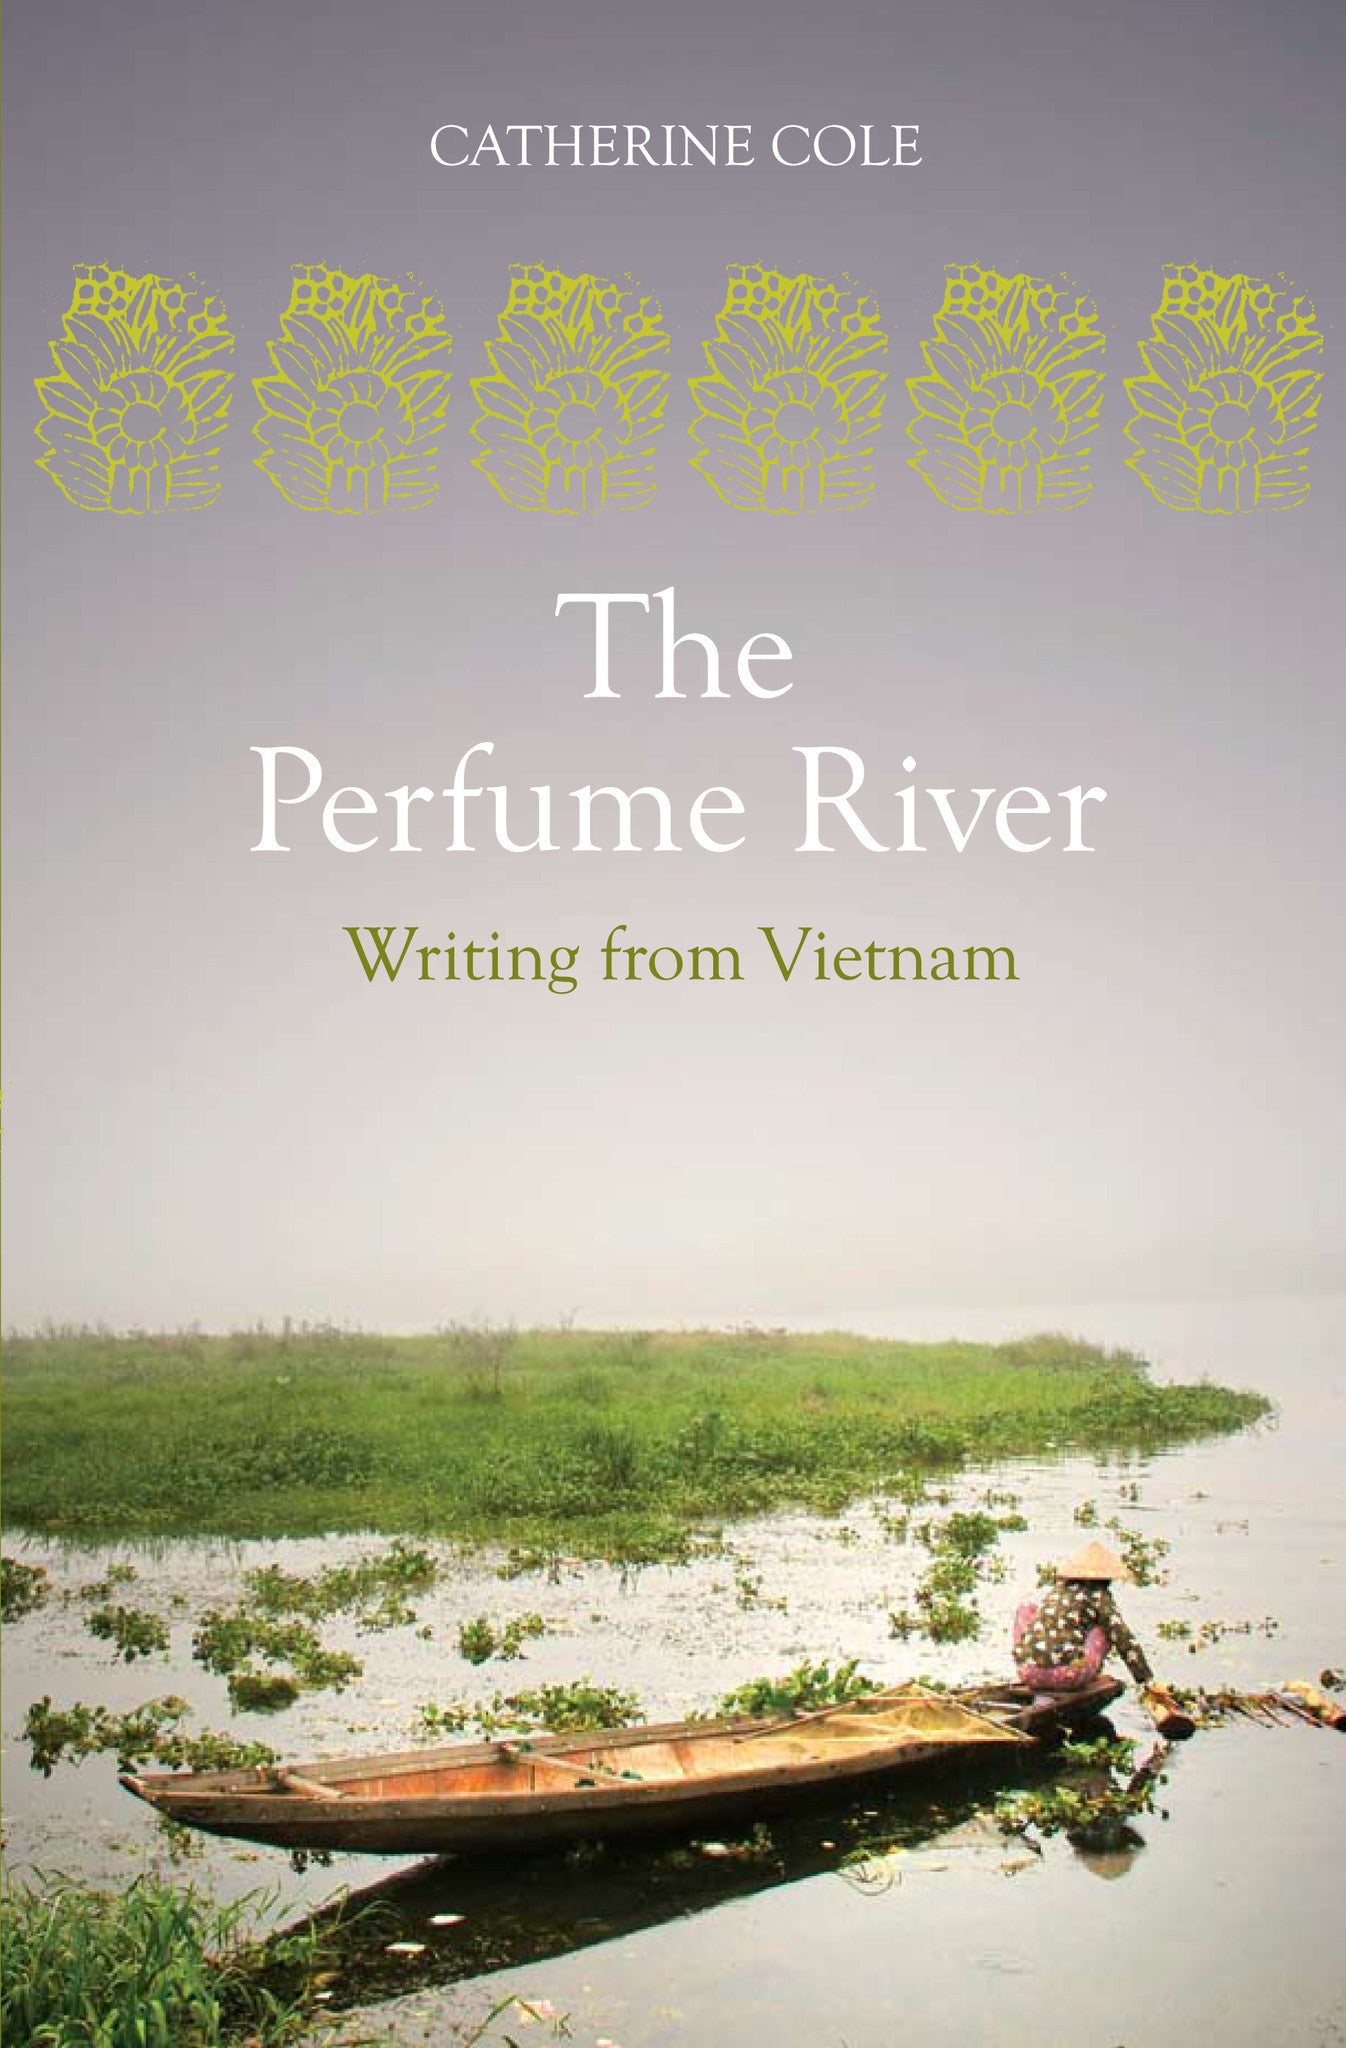 The Perfume River: Writing from Vietnam